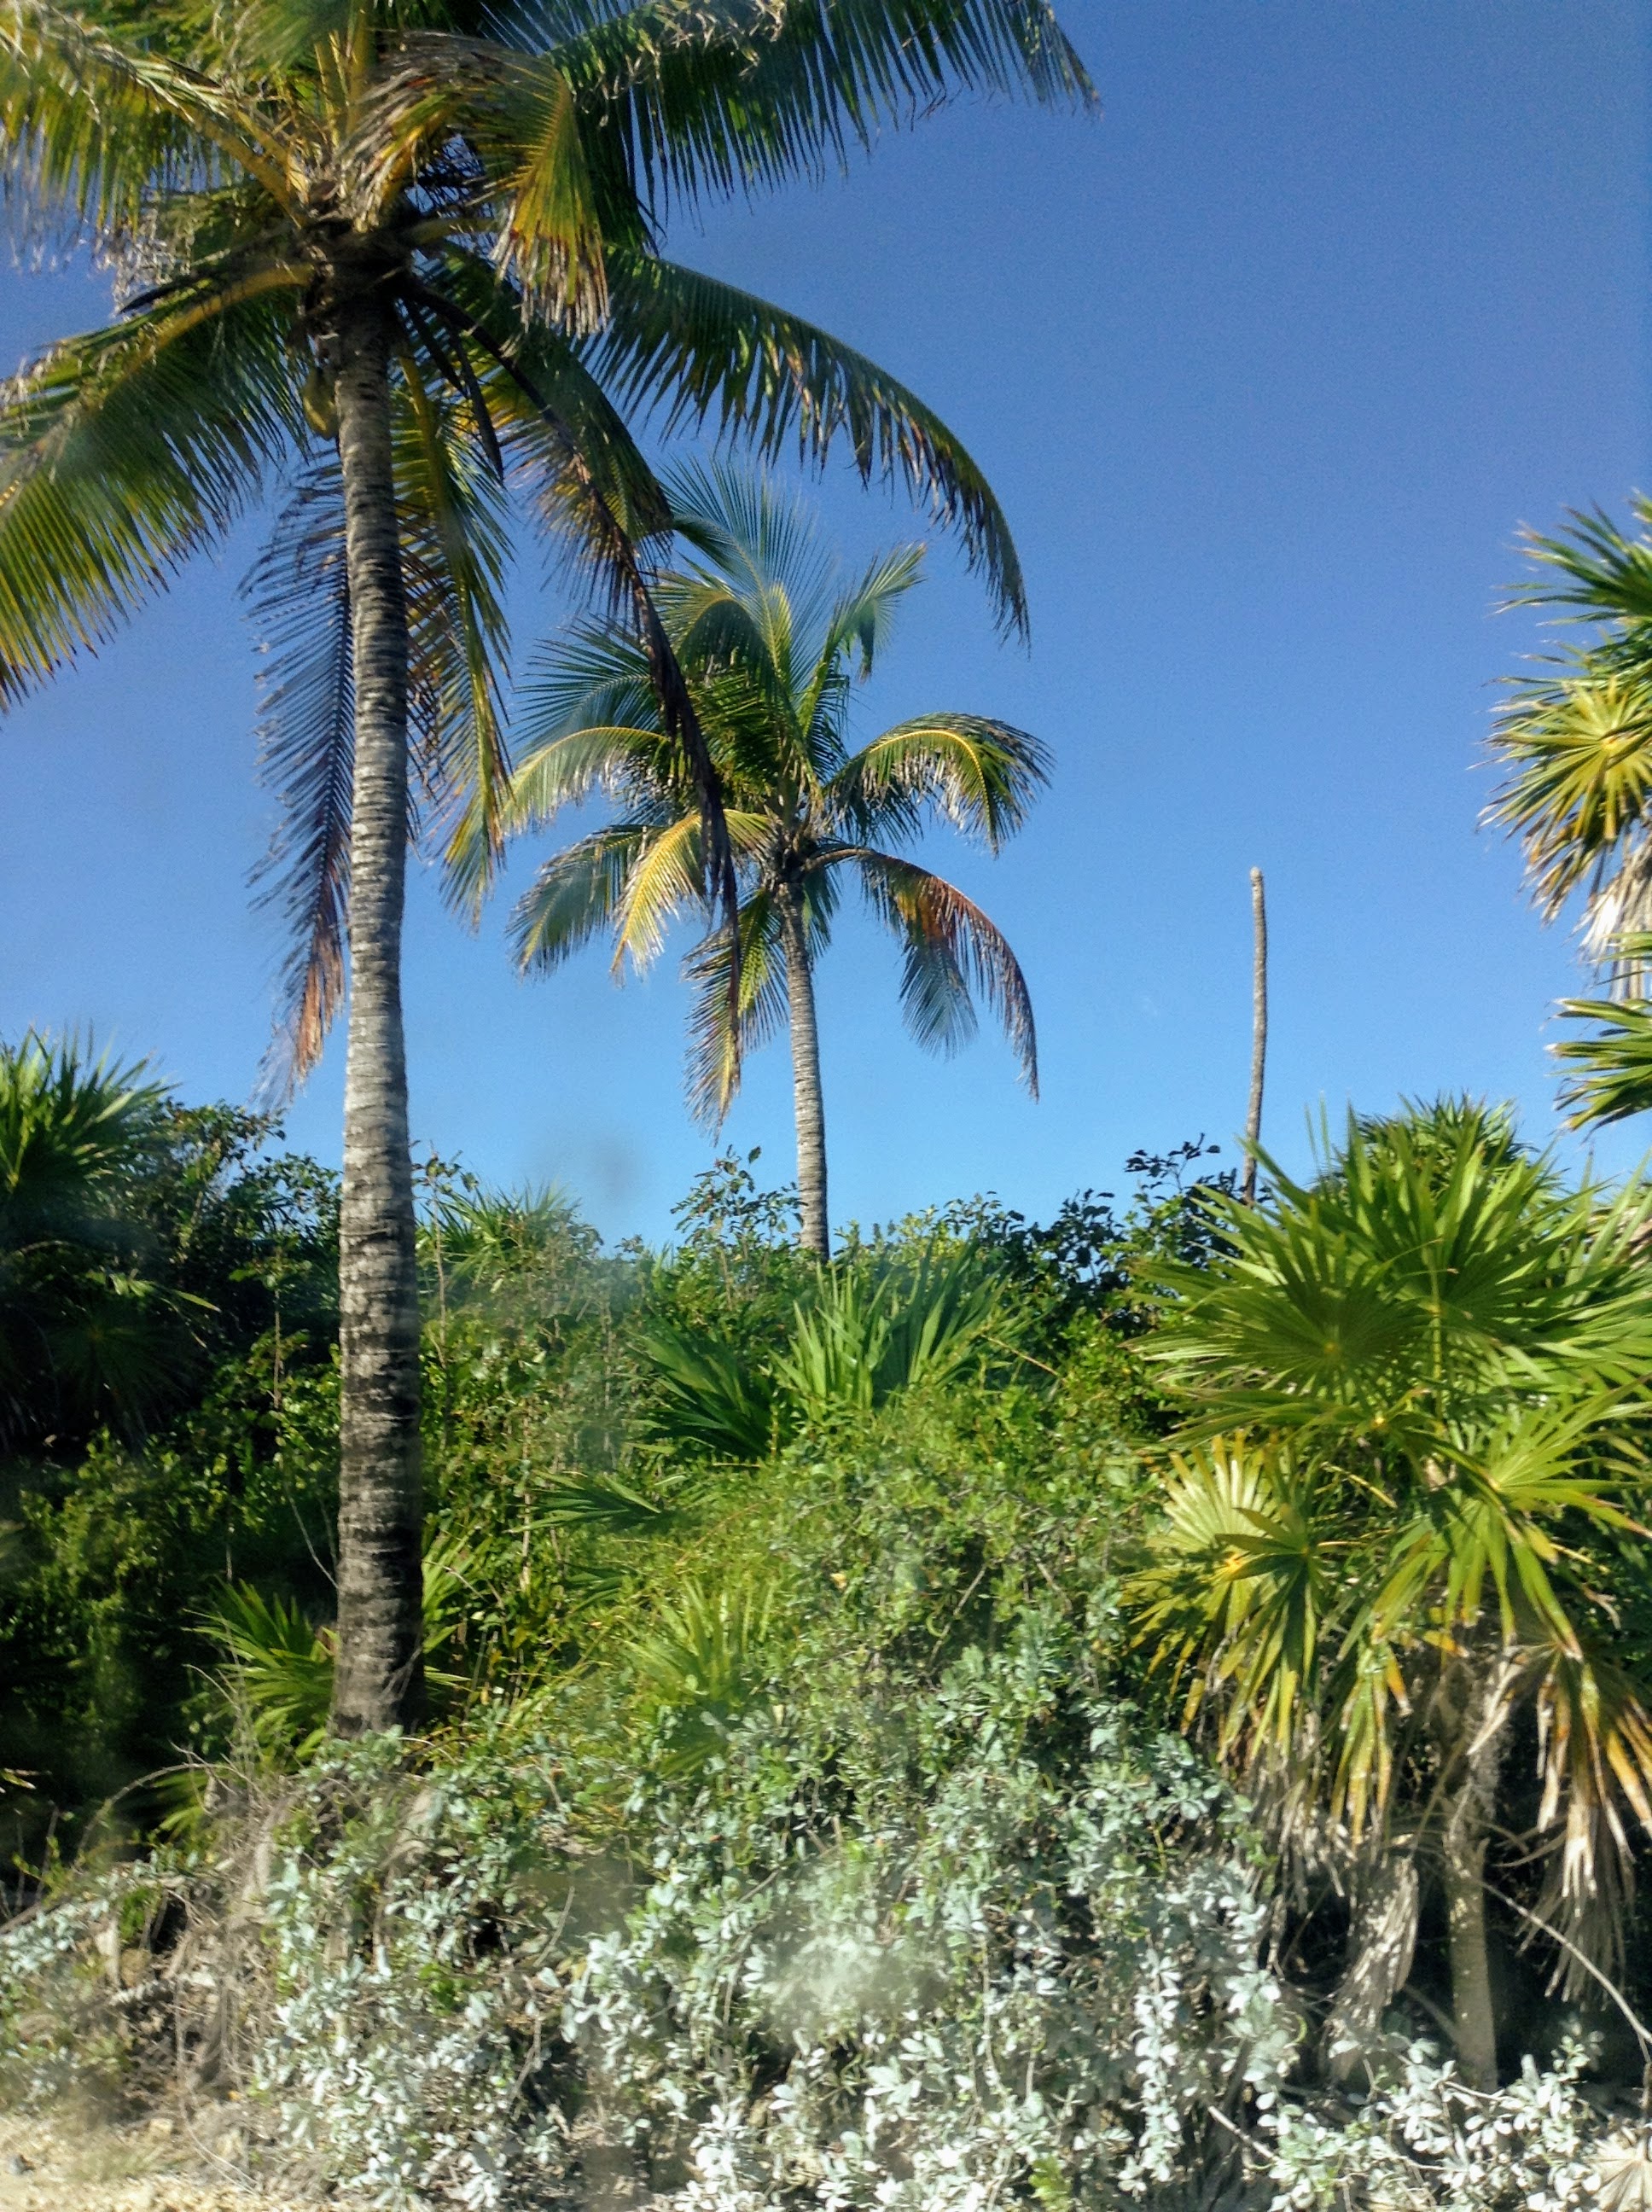 Visit Sian Ka'an for its palm trees and blue skies